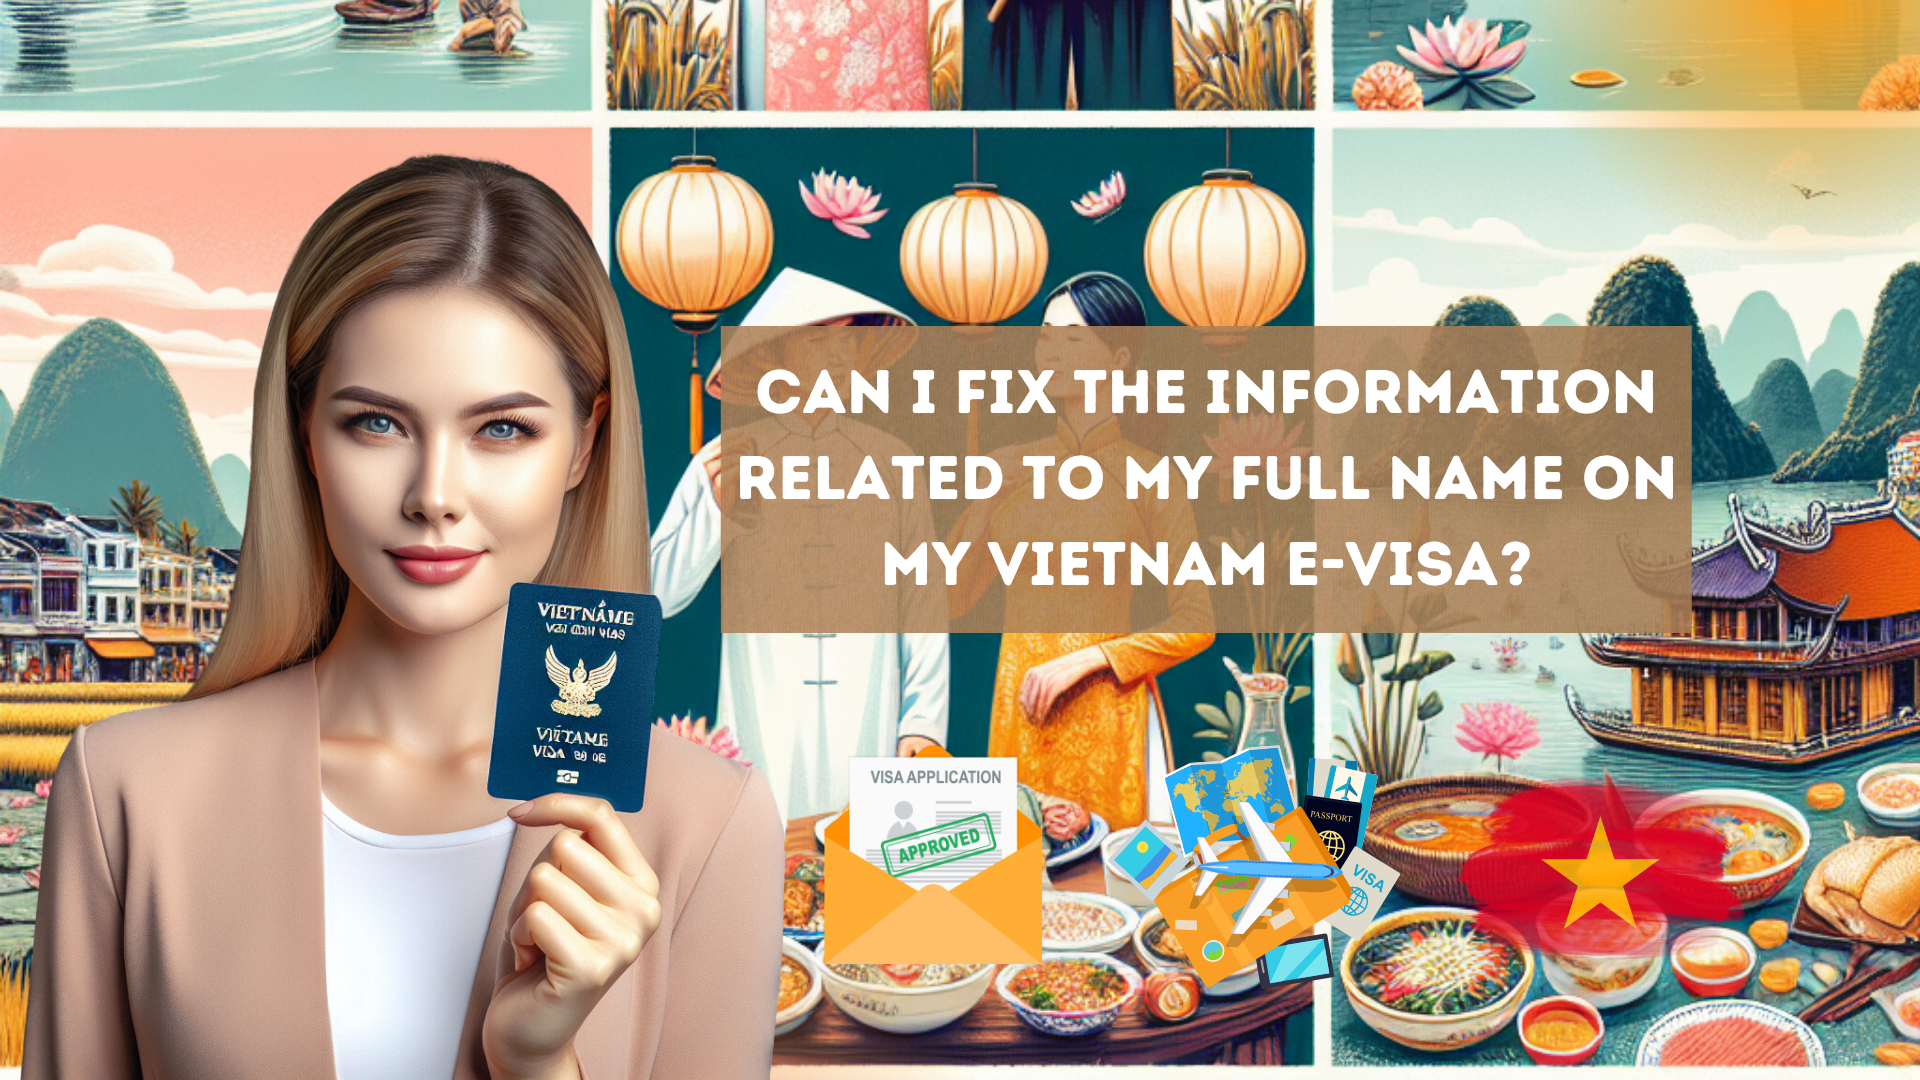 Can I fix the information related to my full name on my Vietnam e-visa?